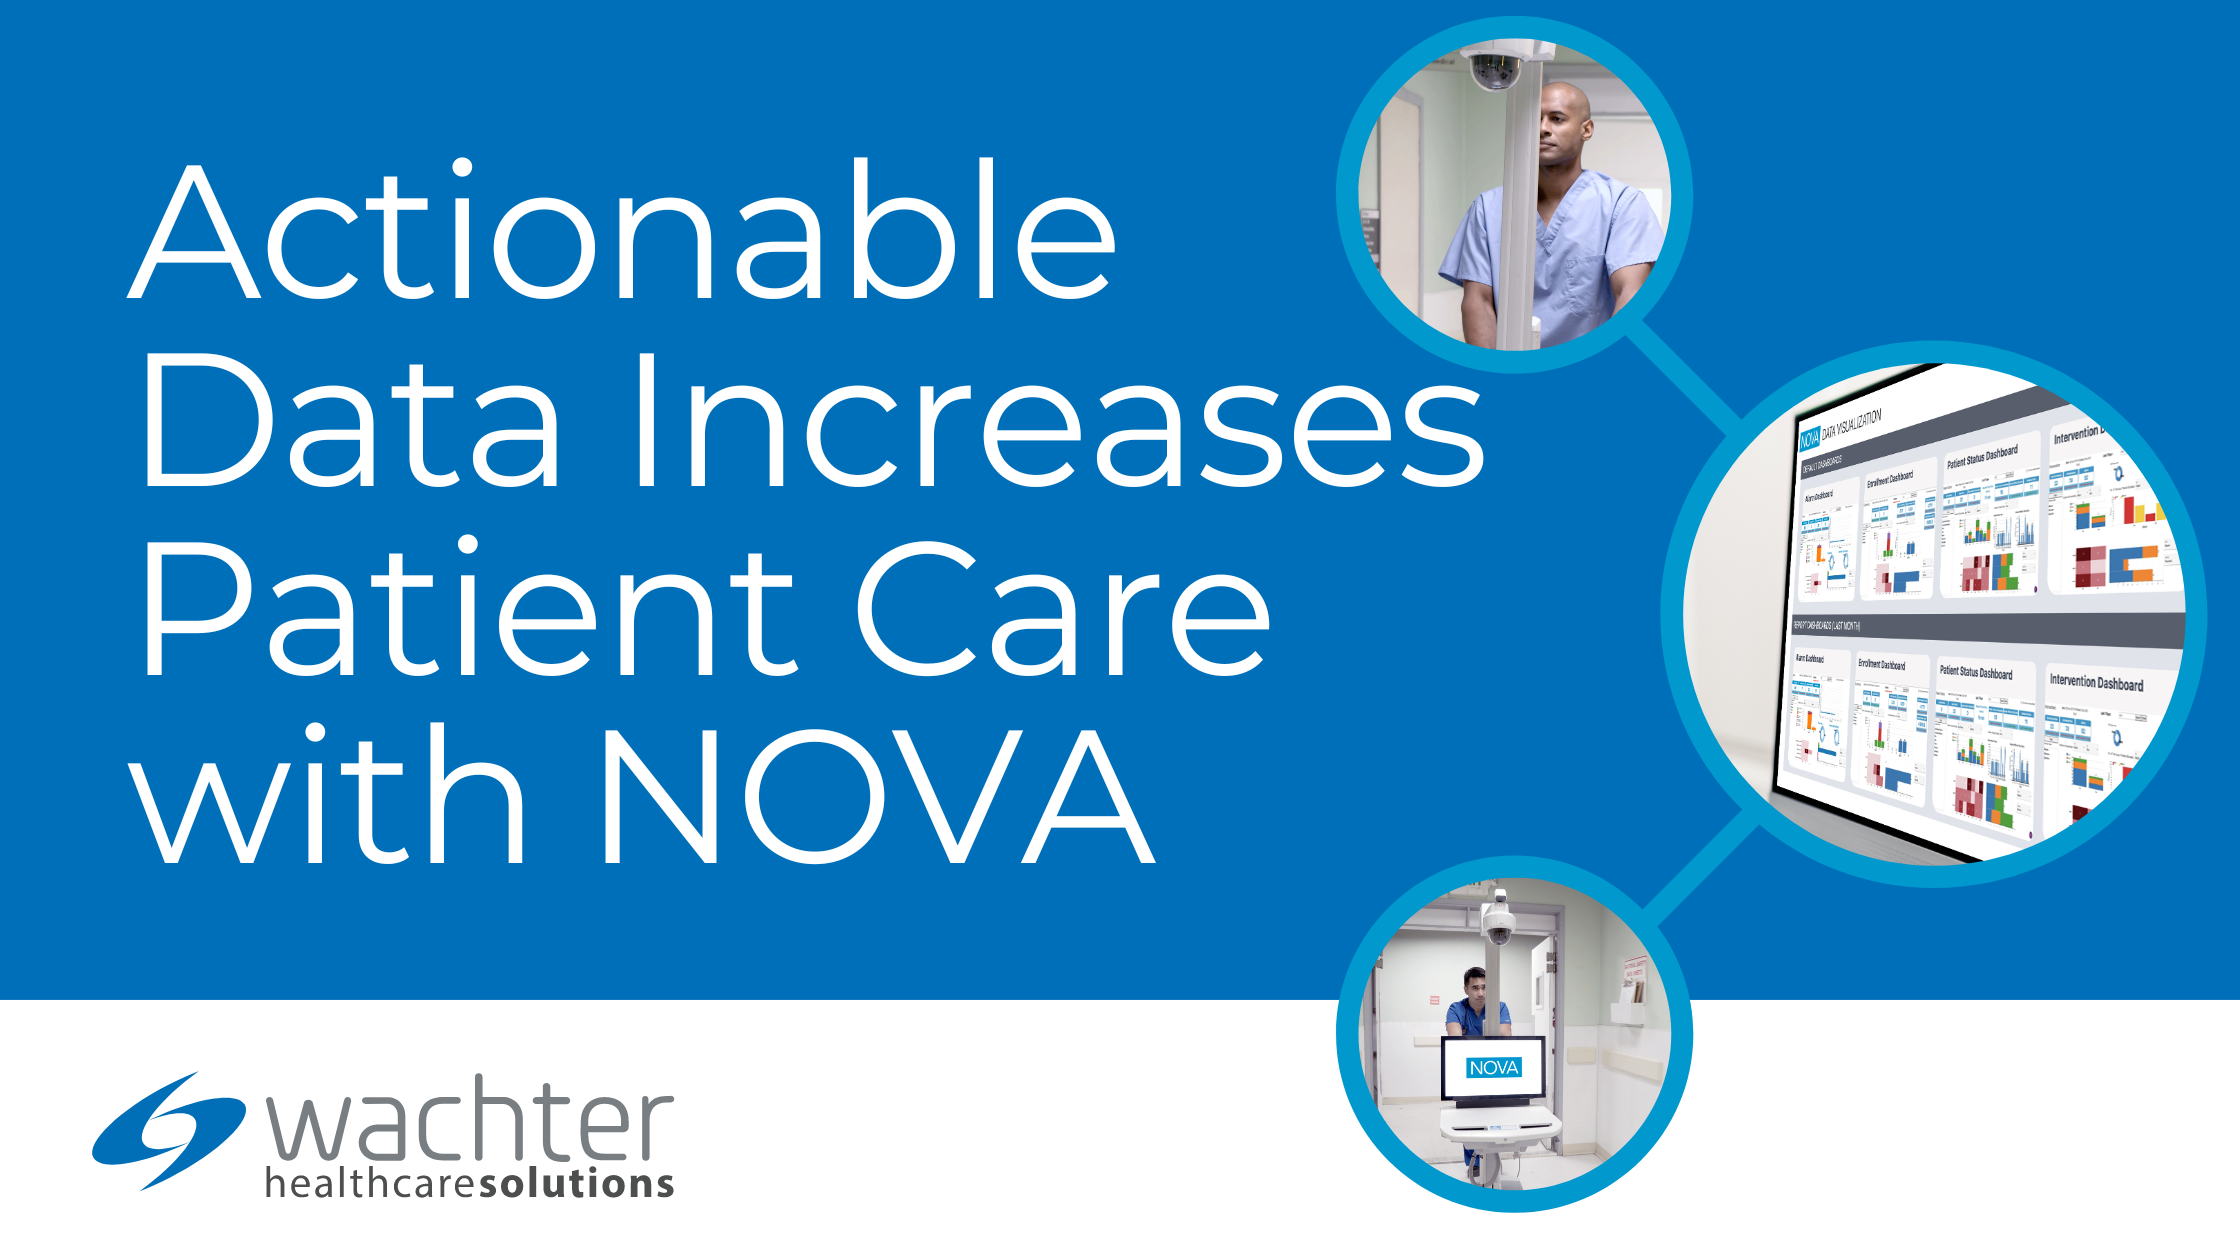 Actionable Data Increases Patient Care with NOVA